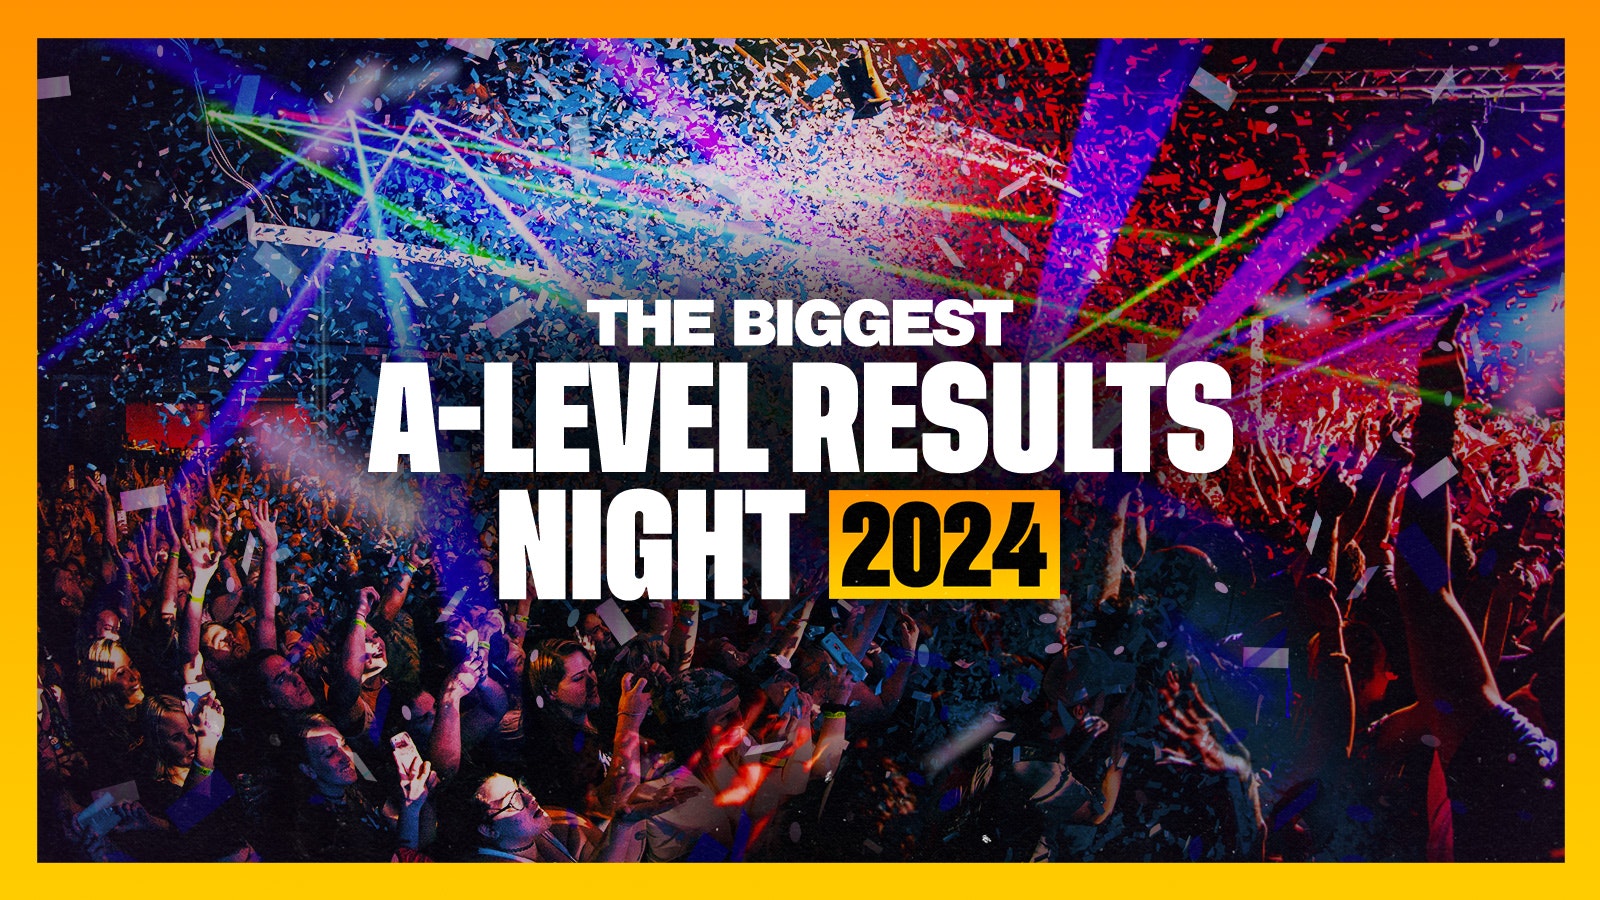 Bournemouth A Level Results Night 2024 – SIGN UP FOR FREE NOW!